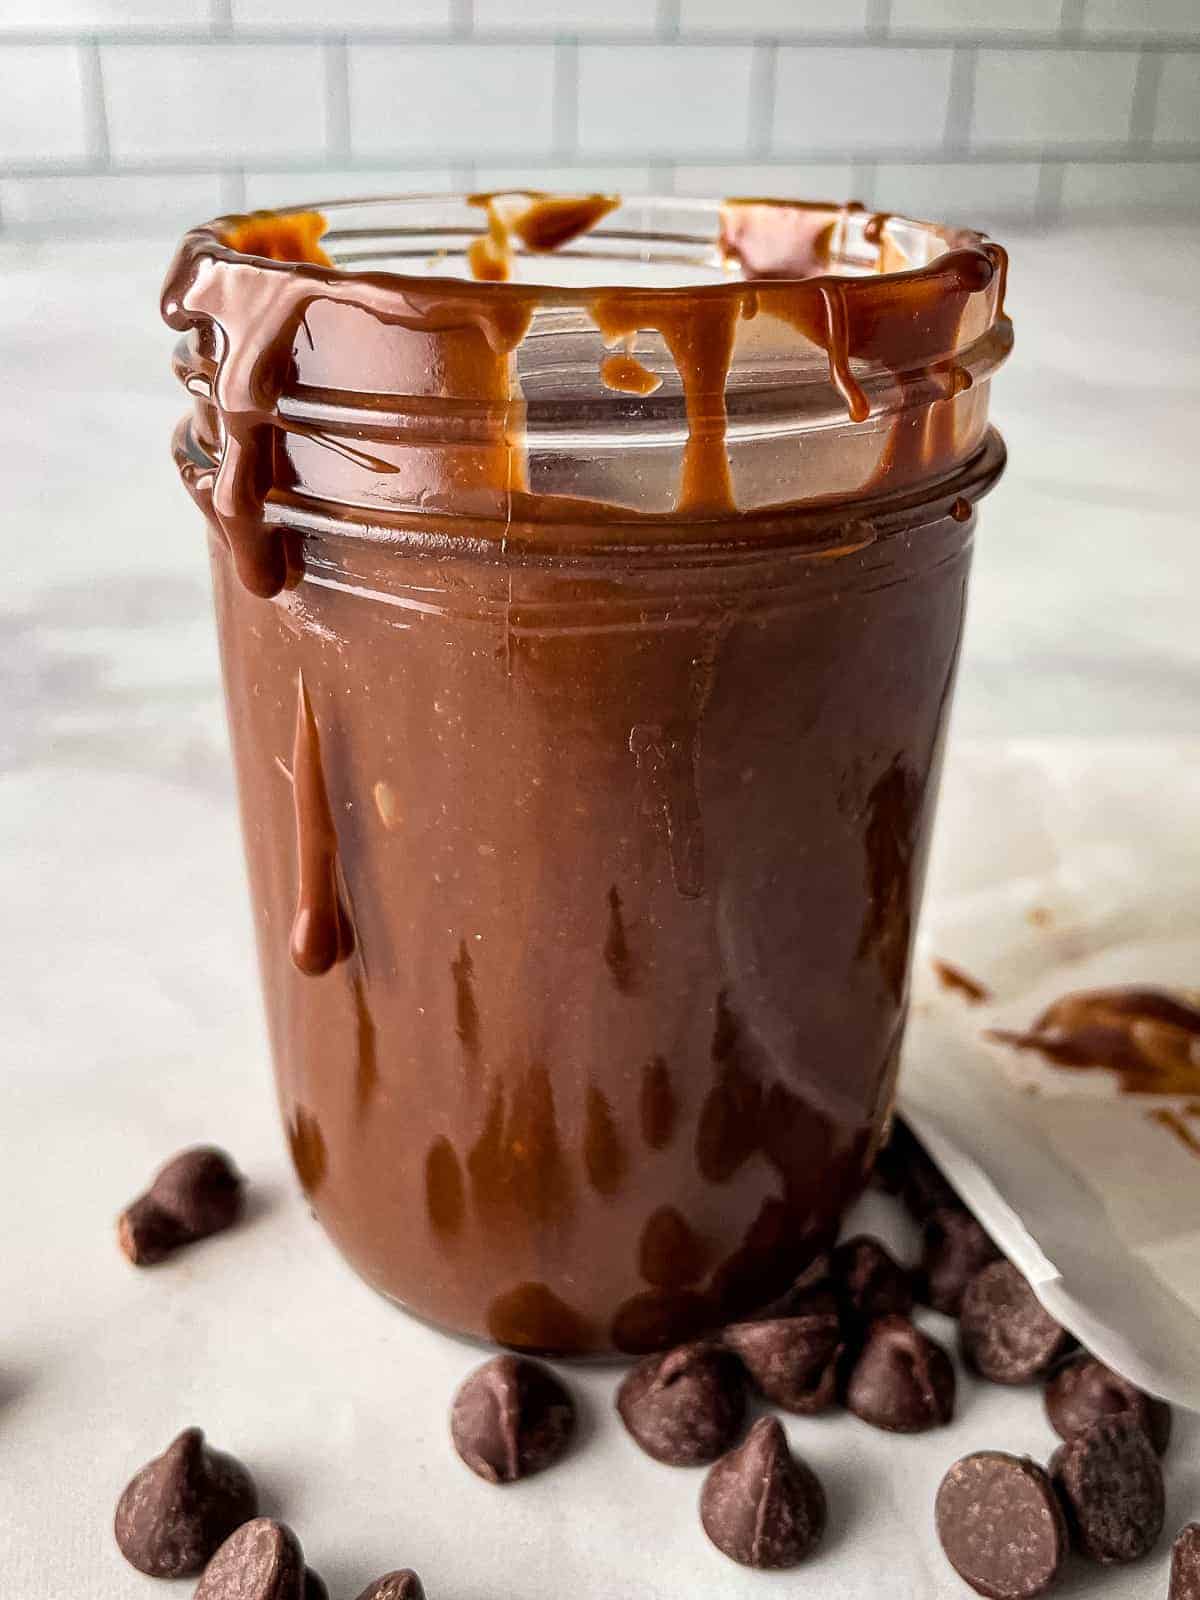 Hot fudge sauce in a glass jar with drips down the sides. Chocolate chips are on the counter next to the jar.